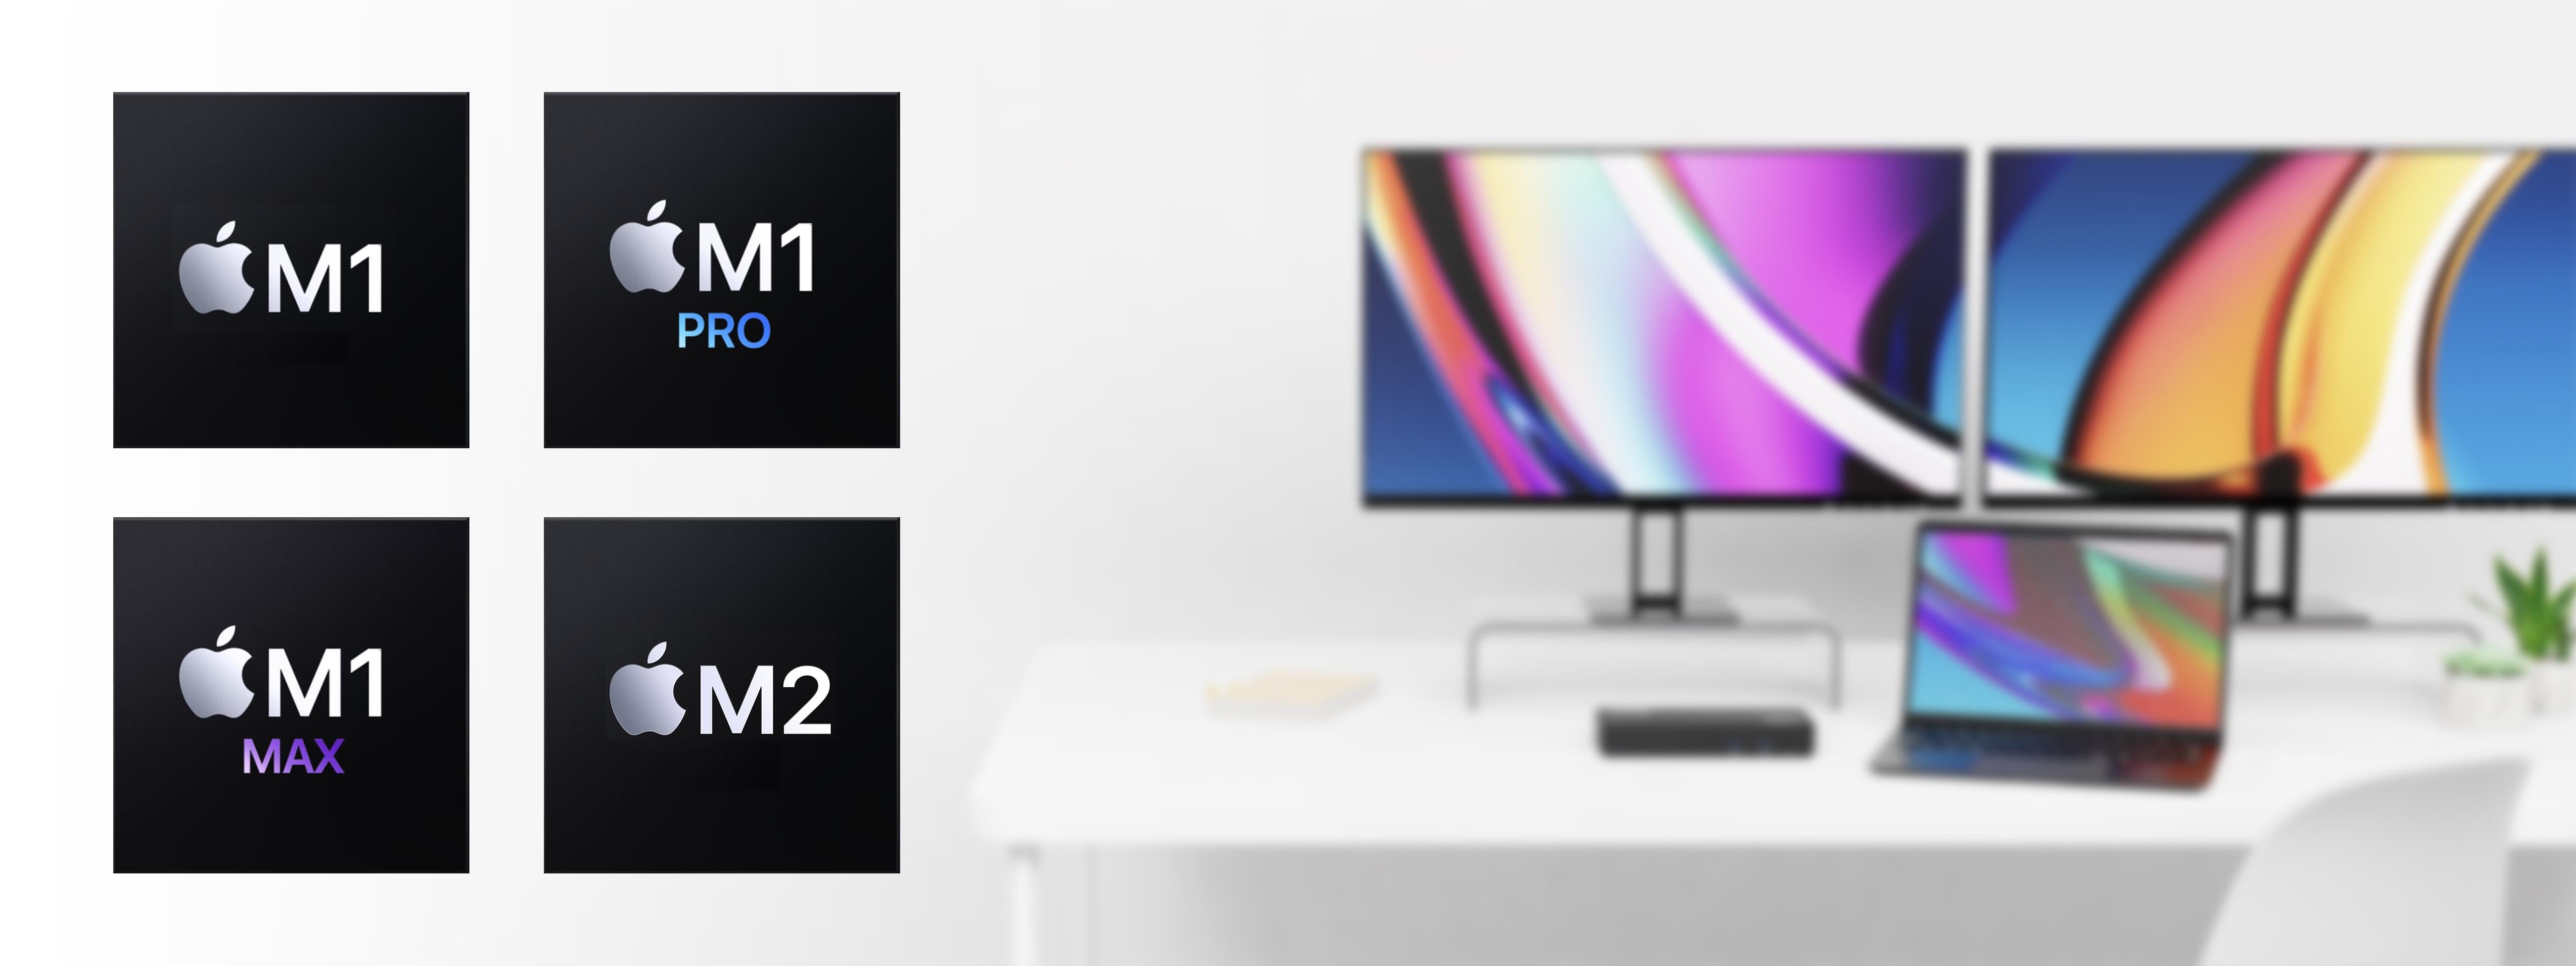 How to easily add a second Thunderbolt monitor to your M1 Mac Mini